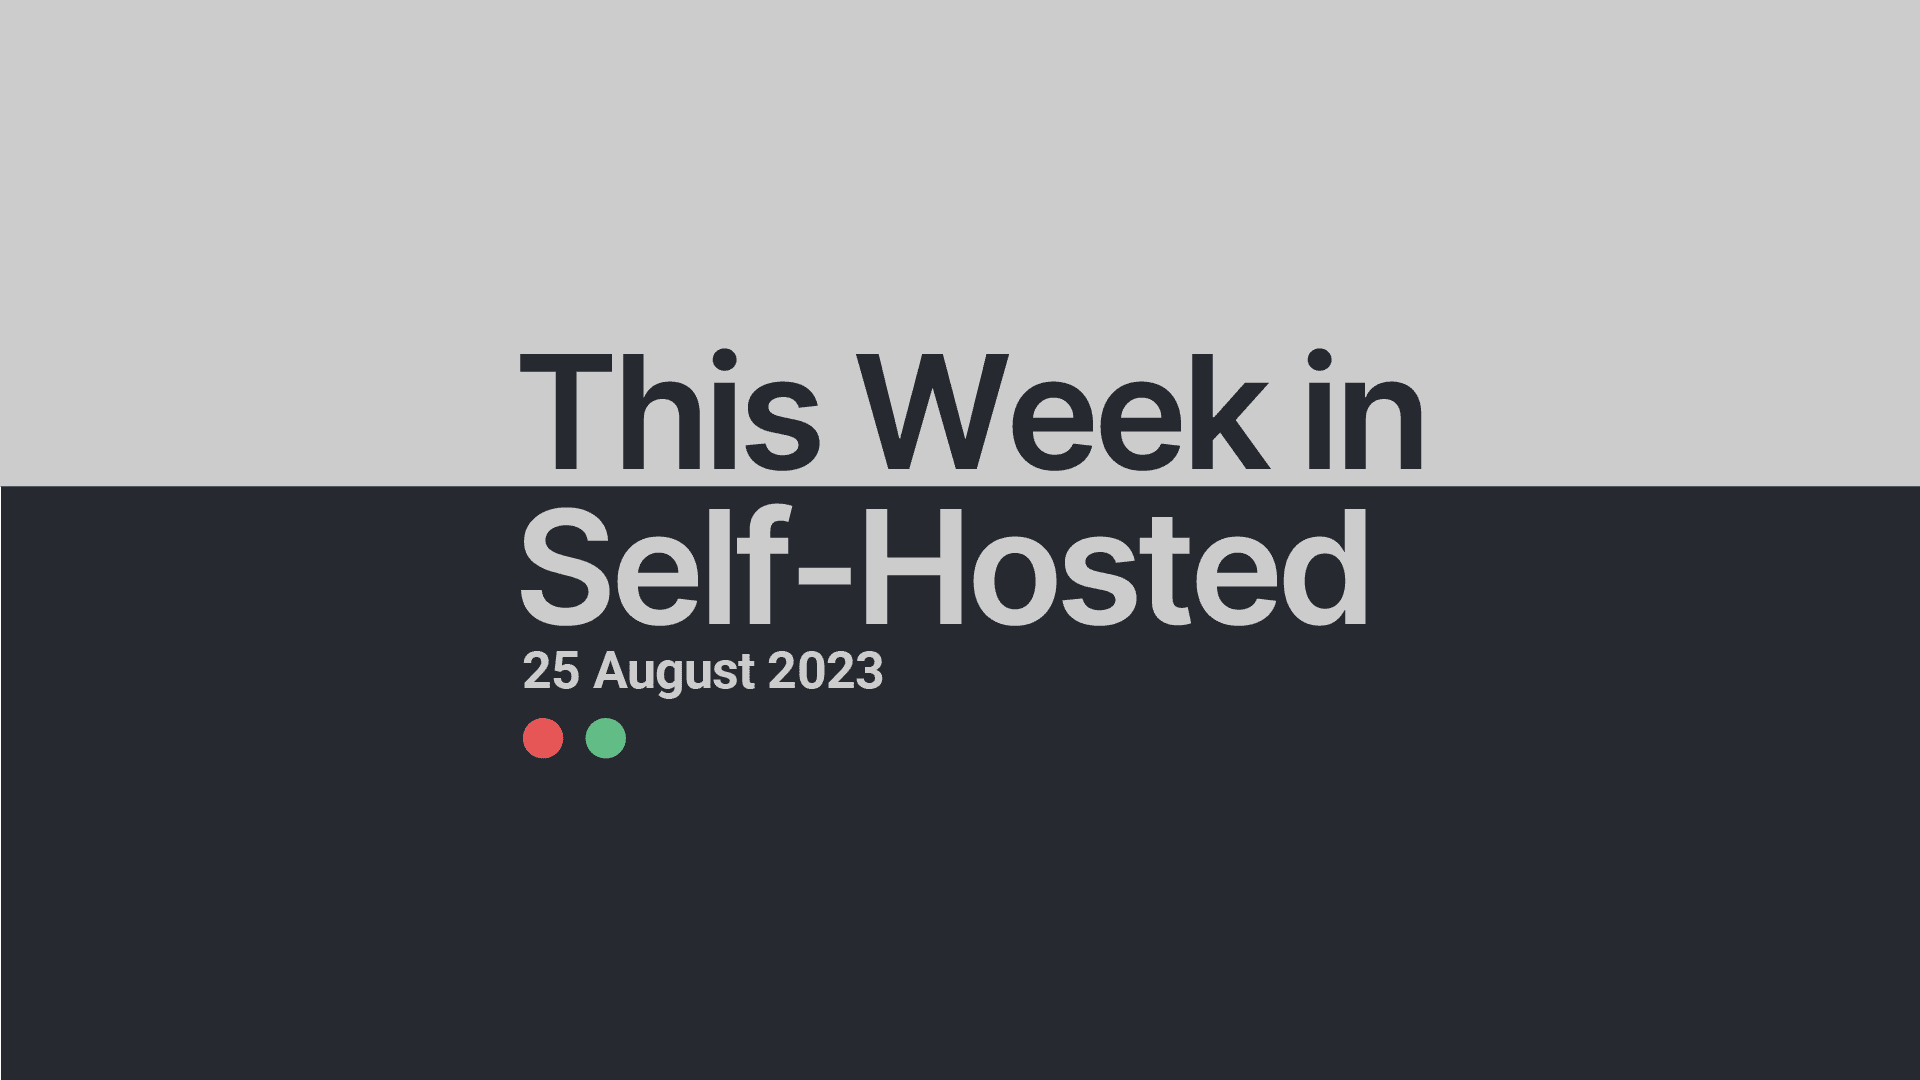 This Week in Self-Hosted (25 August 2023) Post image